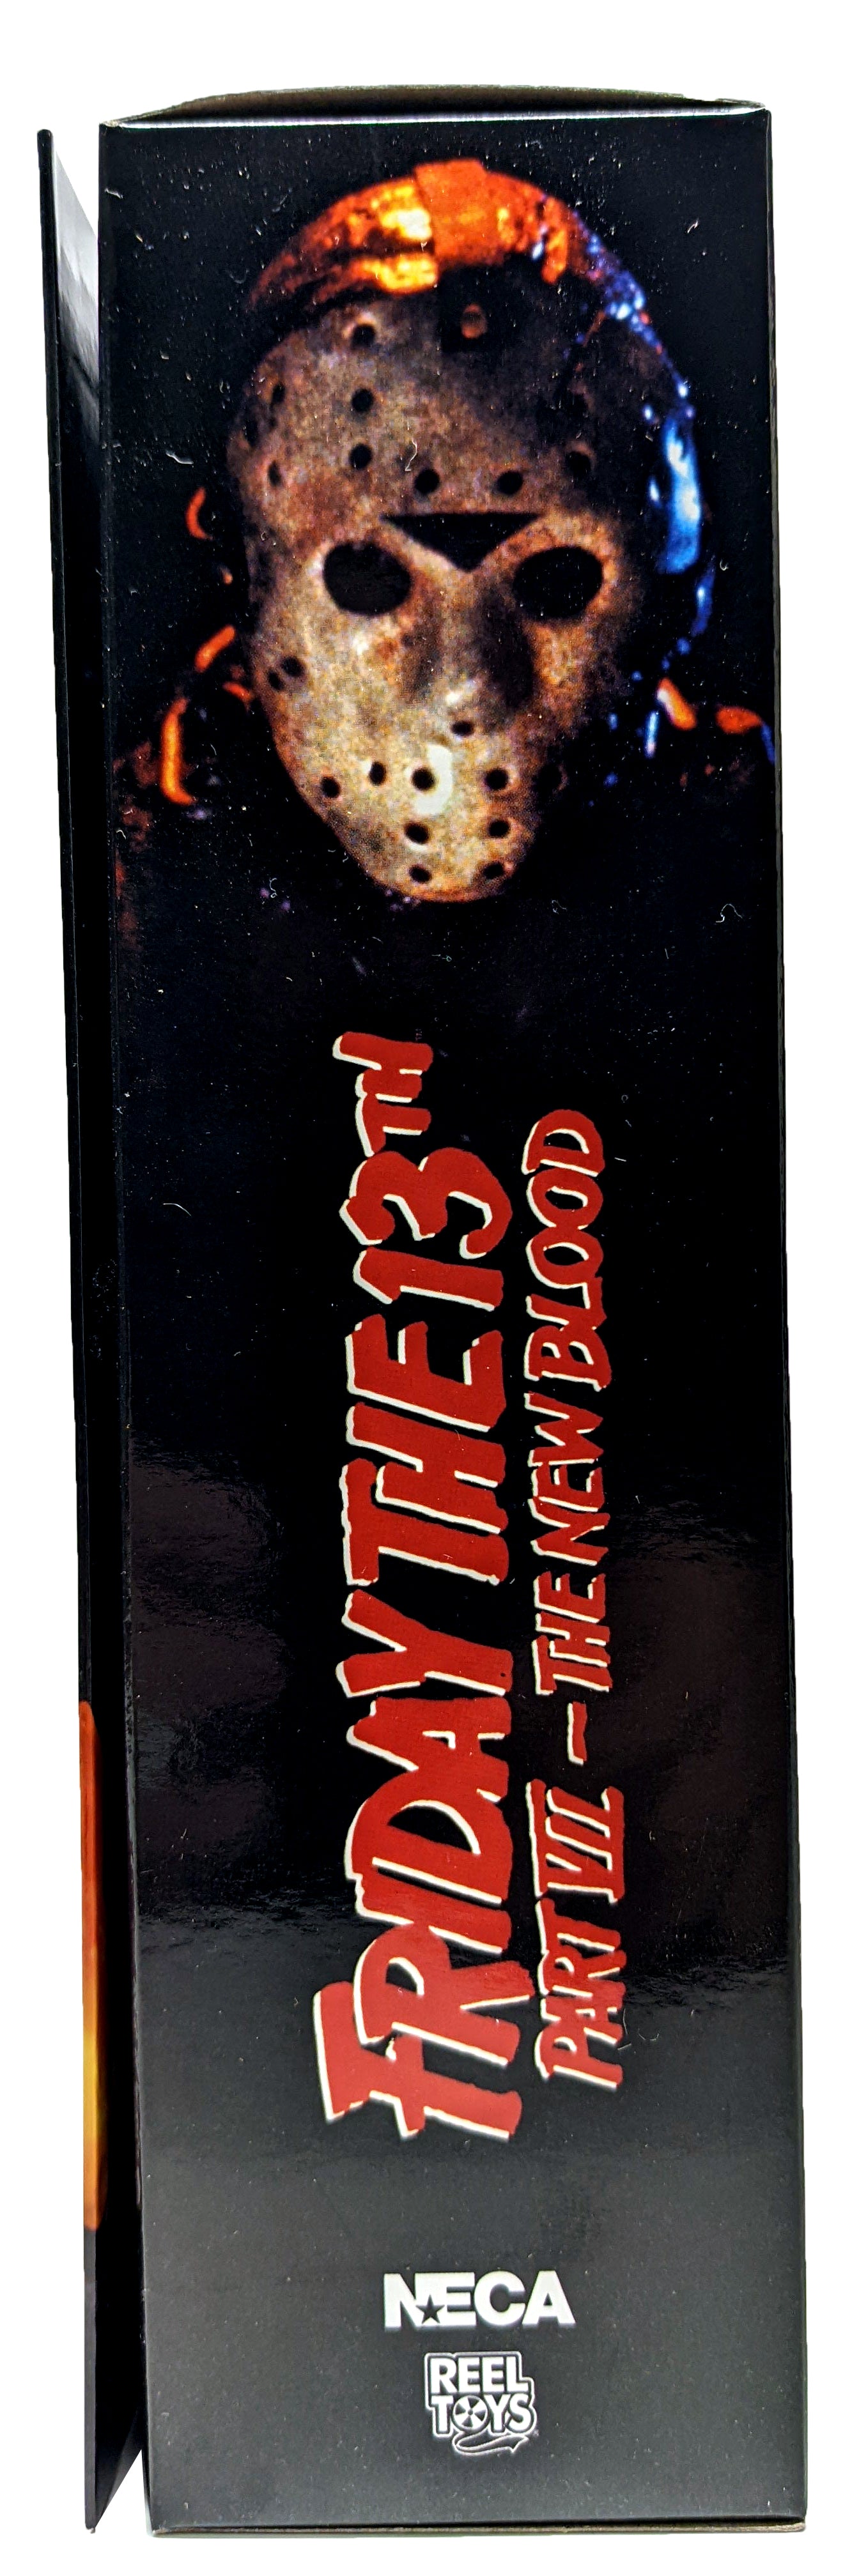 NECA - Friday The 13th Part 7- The New Blood - 7-Inch Scale Action Figure